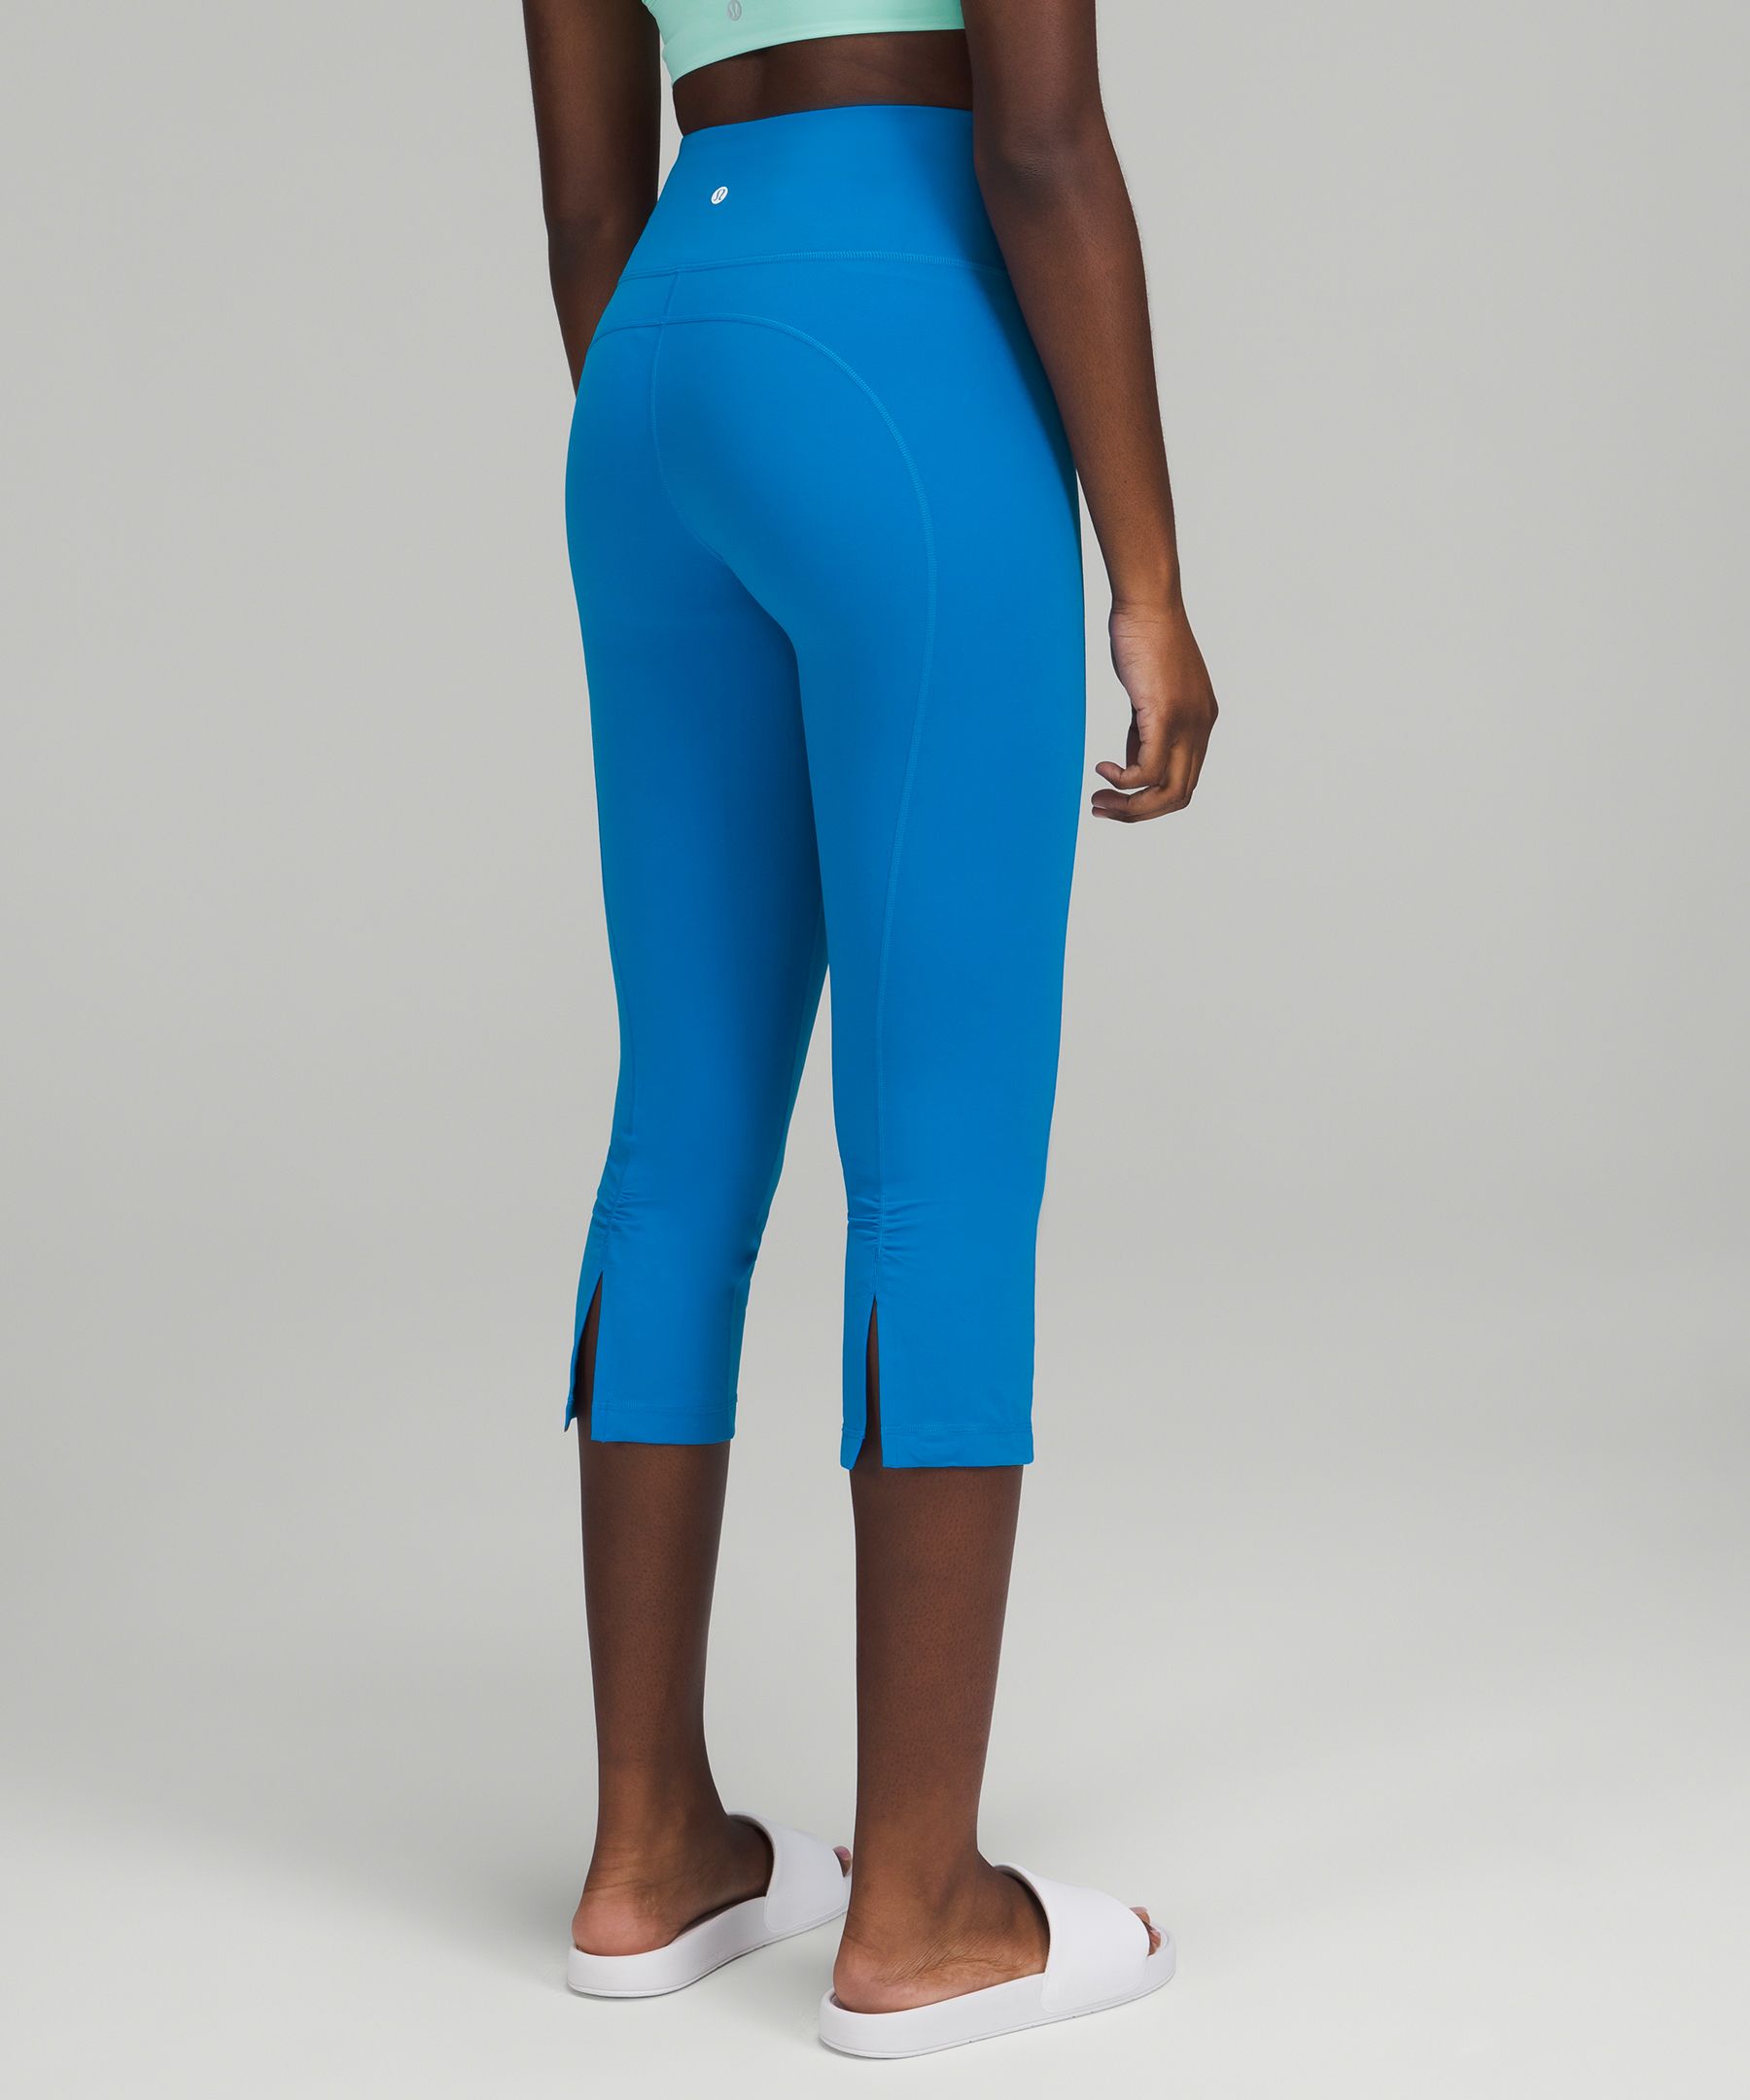 Lululemon gather and crow black crops Luon fabric Size 6 - $32